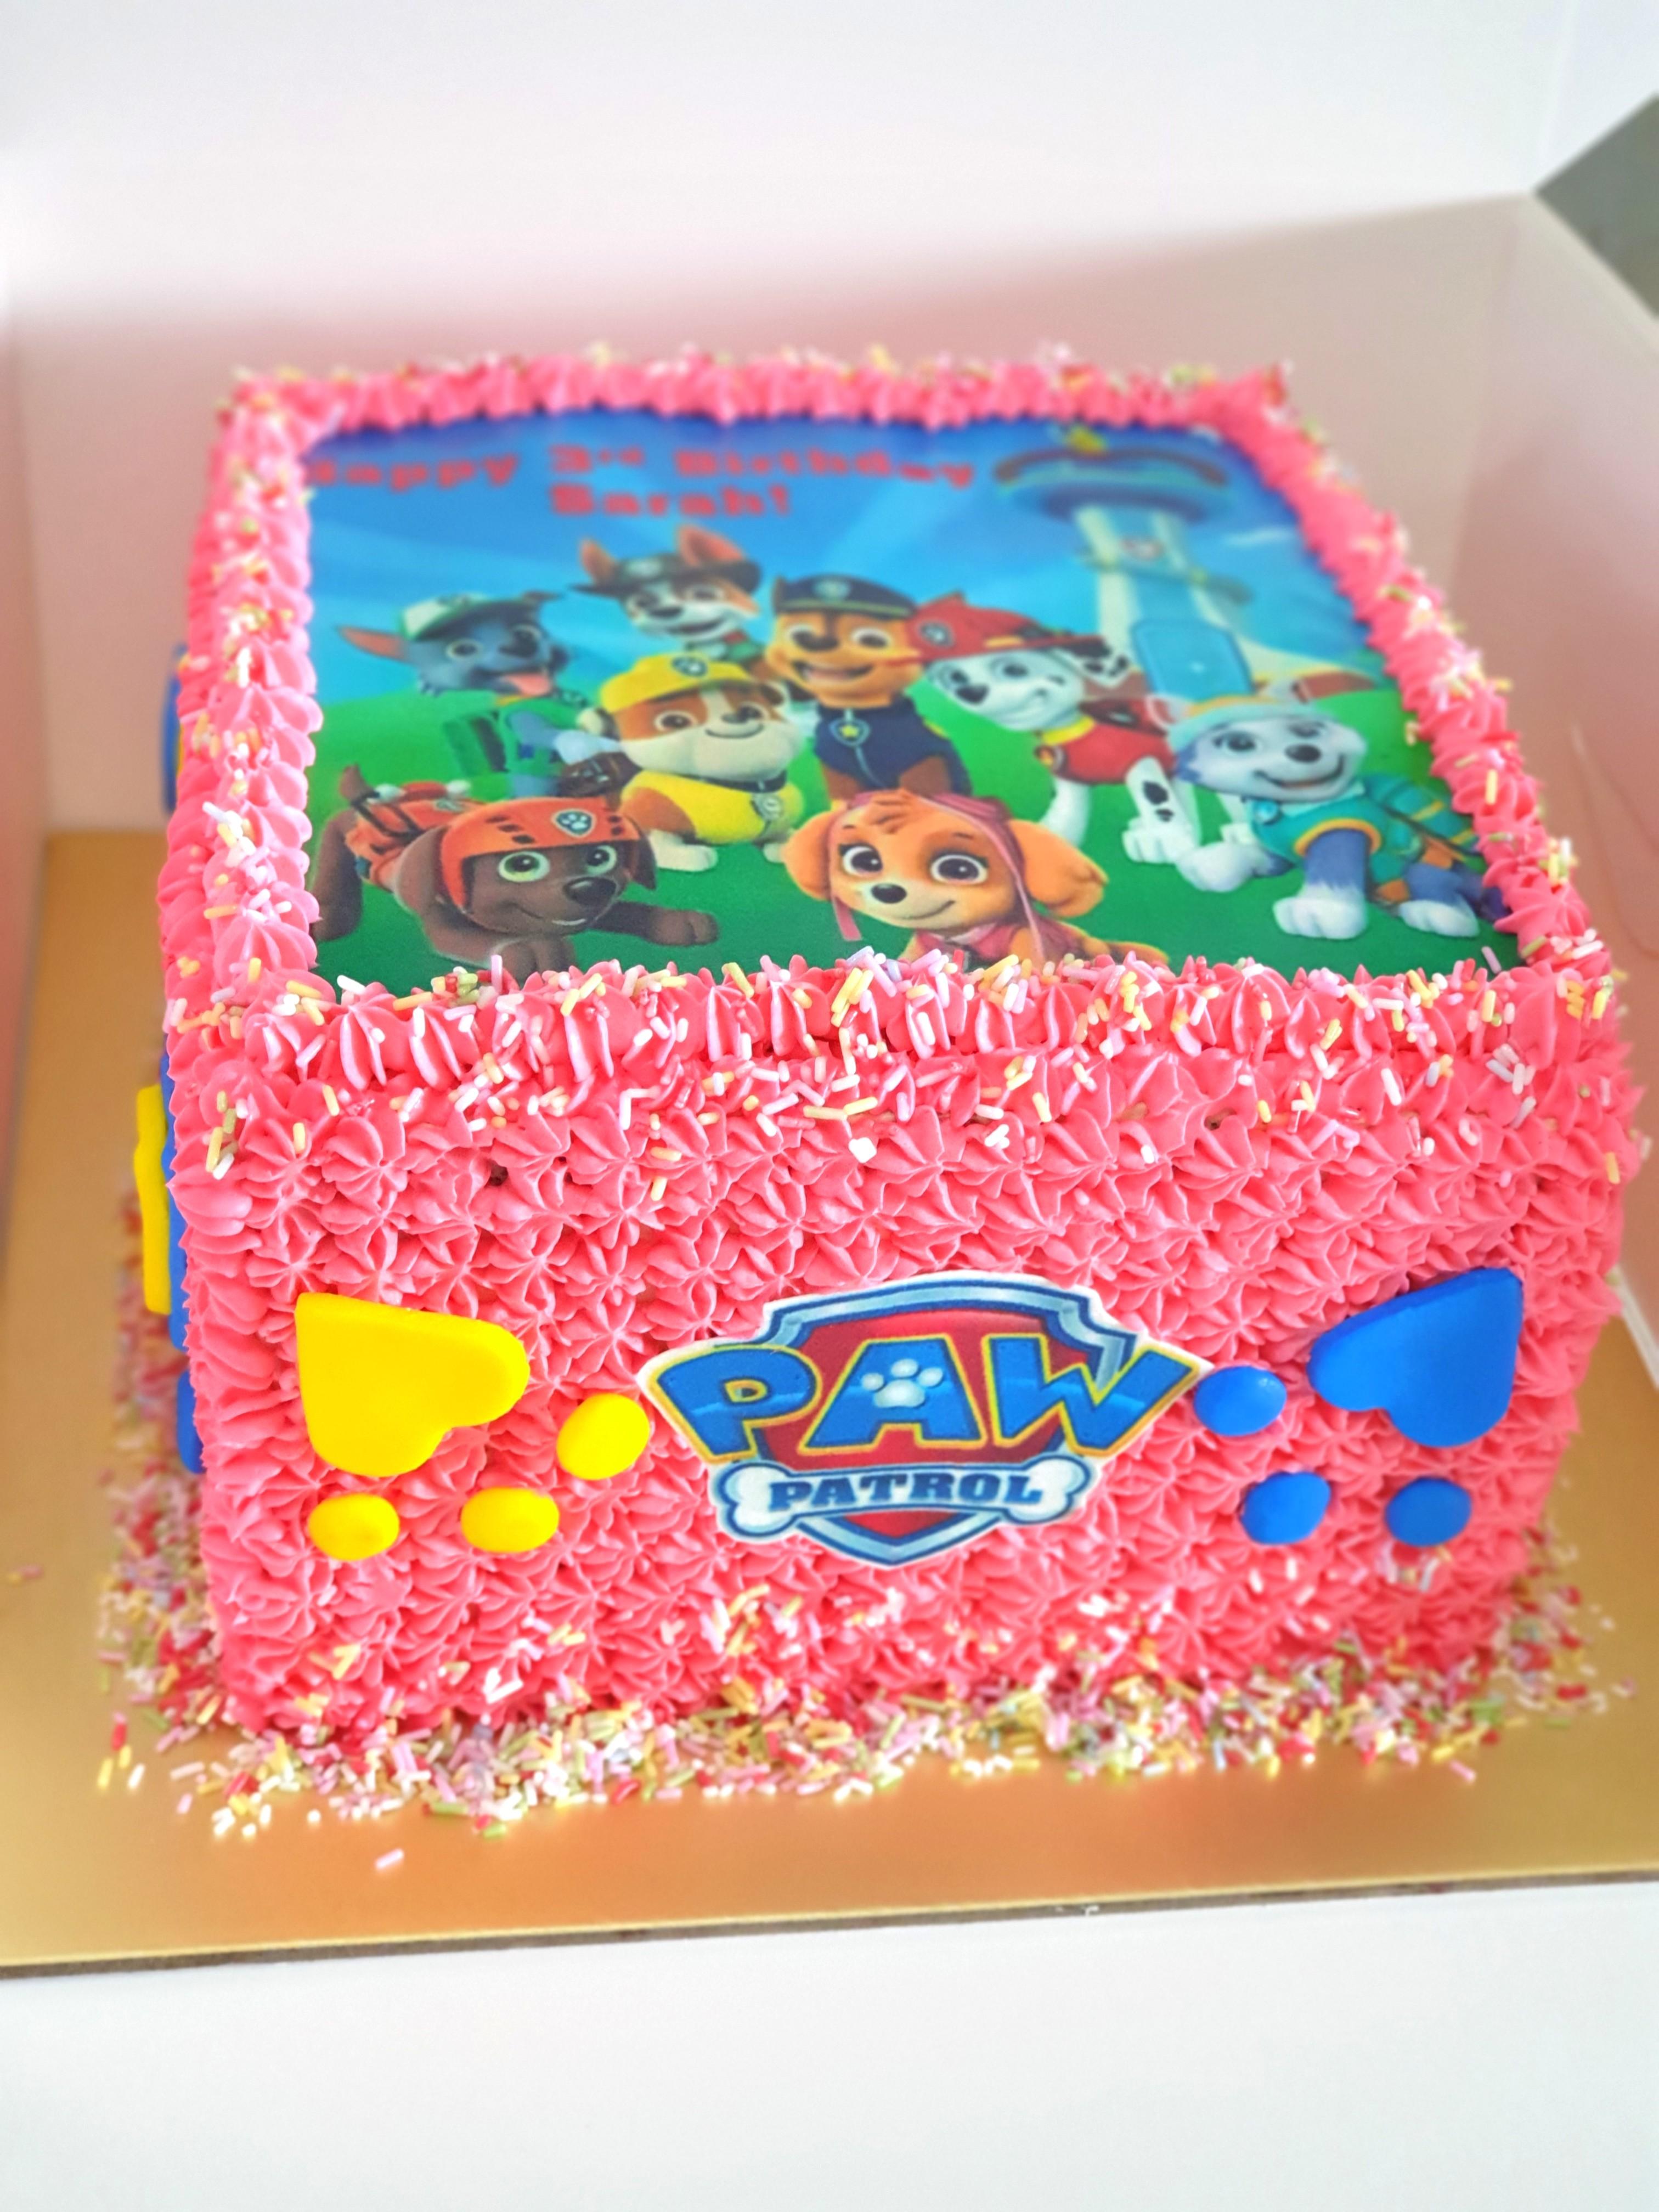 Patrol Cake In Pink, Food & Homemade Bakes on Carousell